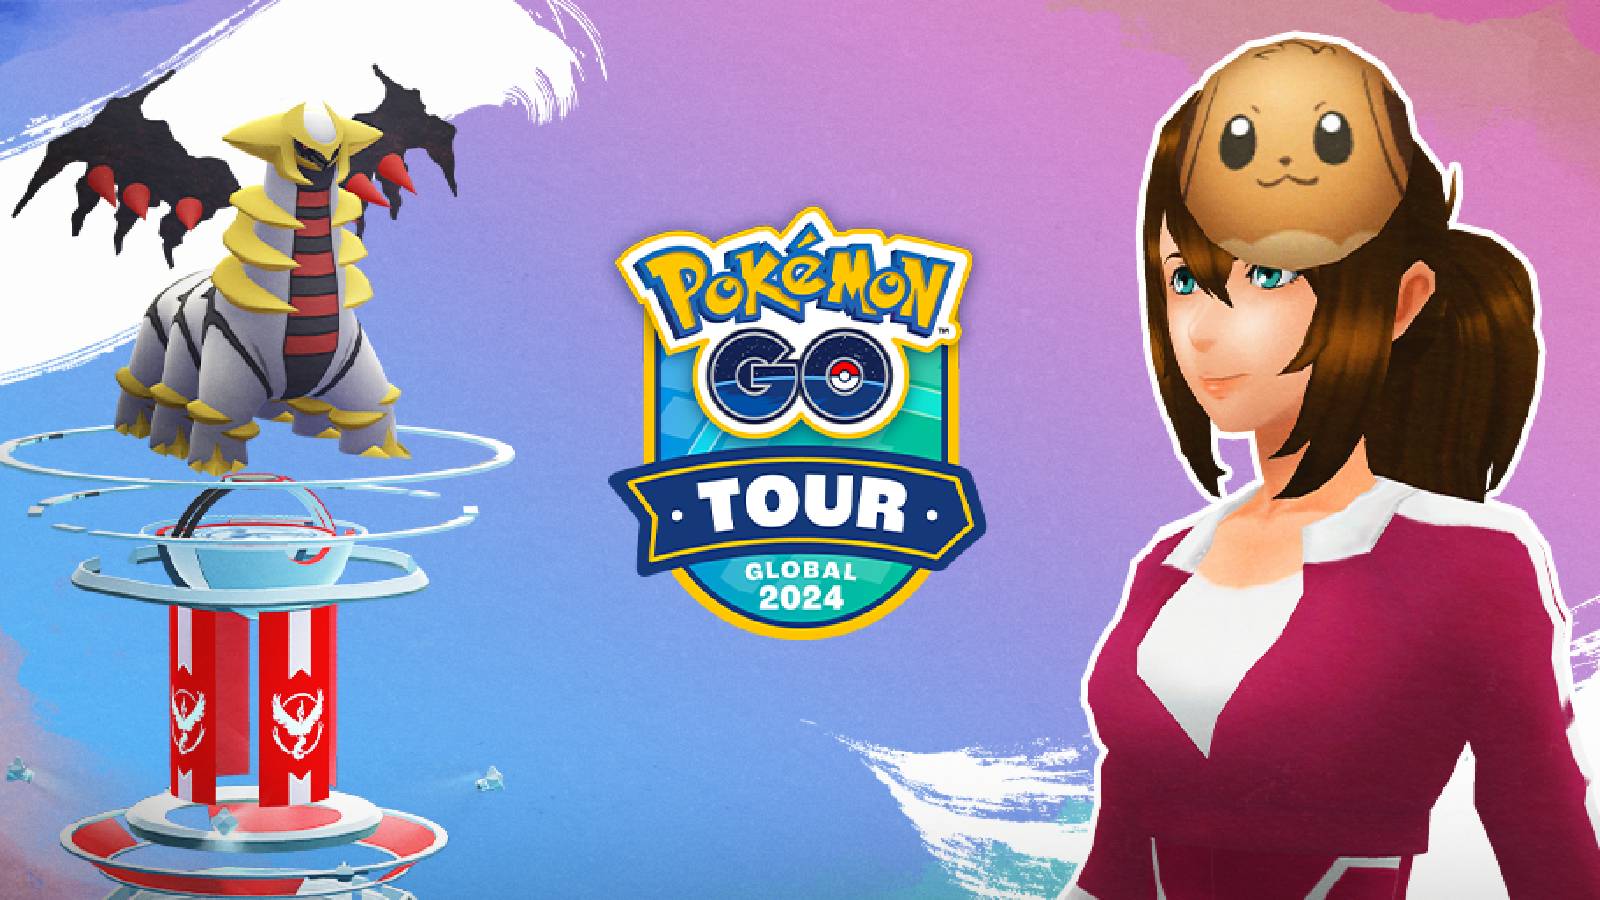 Key art for Pokemon Go shows a trainer wearing an Eevee hat, while Giratina appears above a Raid Gym on the left